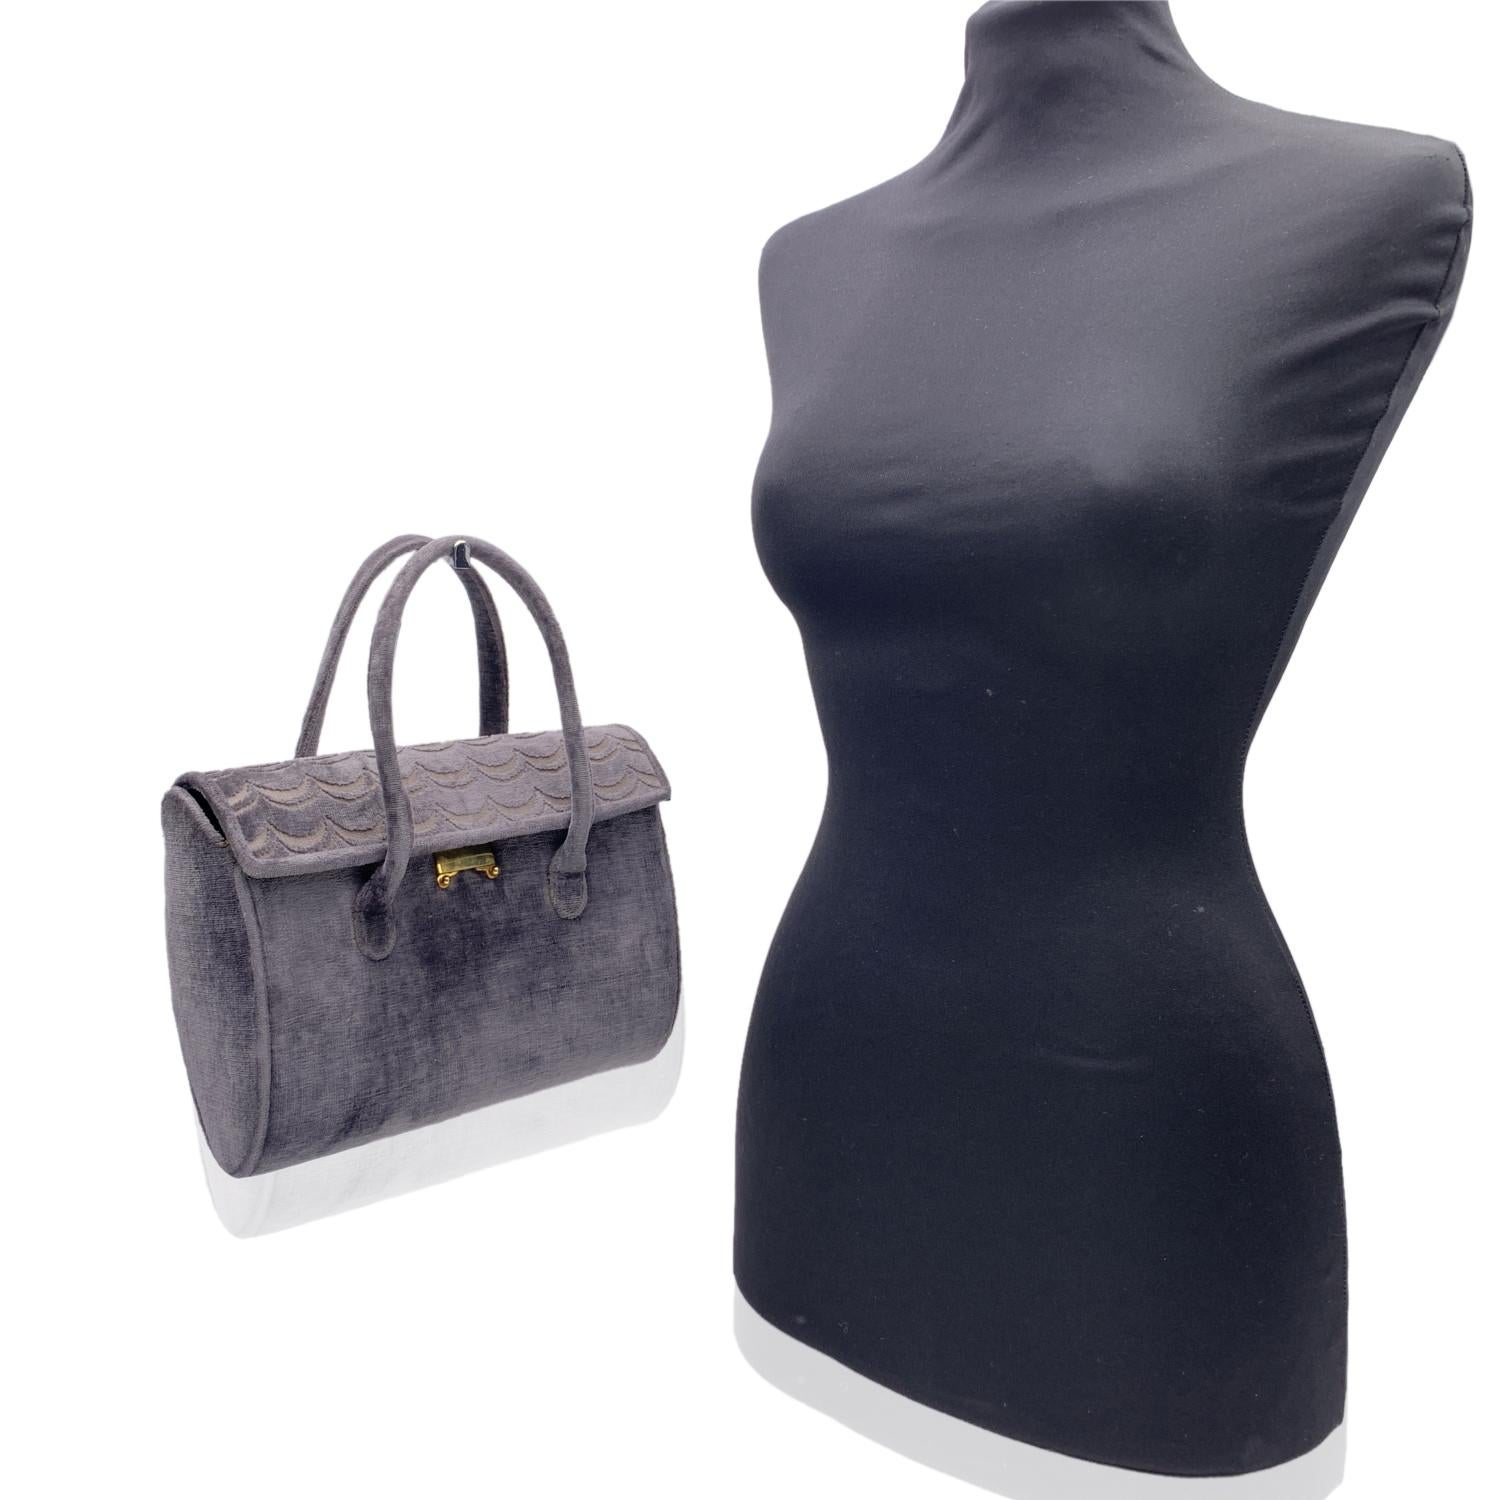 ROBERTA DI CAMERINO grey velvet handbag. Double top handles. Flap with push closure on the front. Cut out motif on the flap. Black leather lining. 1 side zip pocket and 2 side open pockets. 